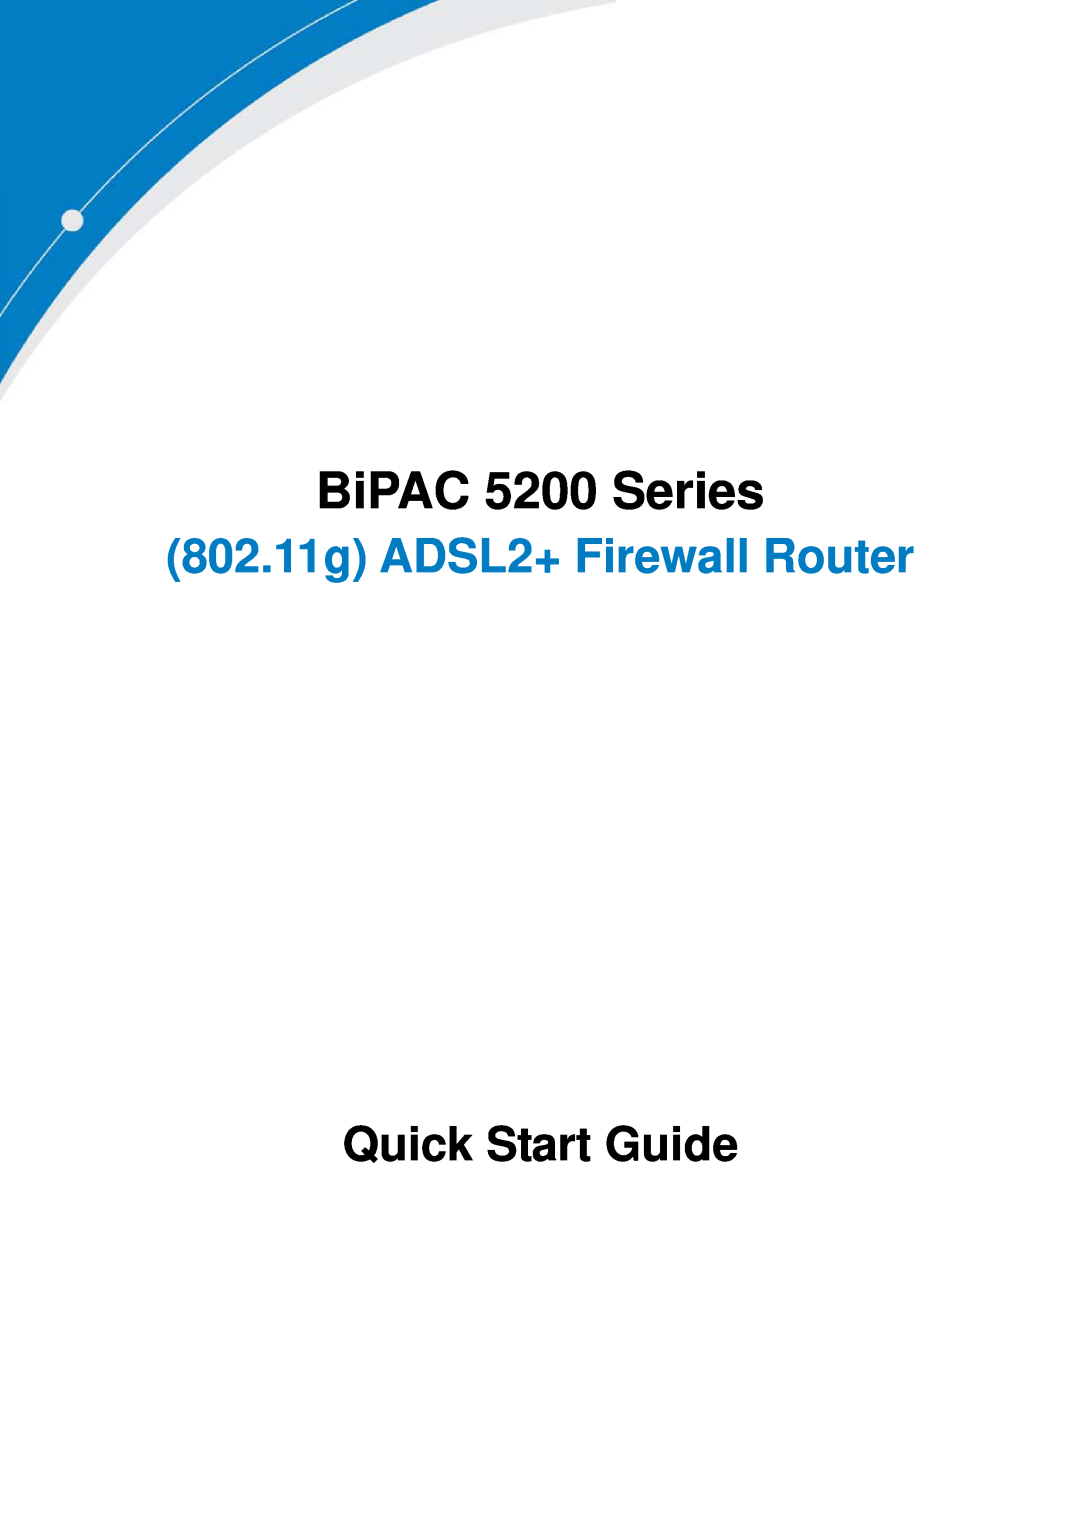 Billion Electric Company 5200S Series quick start BiPAC 5200 Series, 802.11g ADSL2+ Firewall Router, Quick Start Guide 